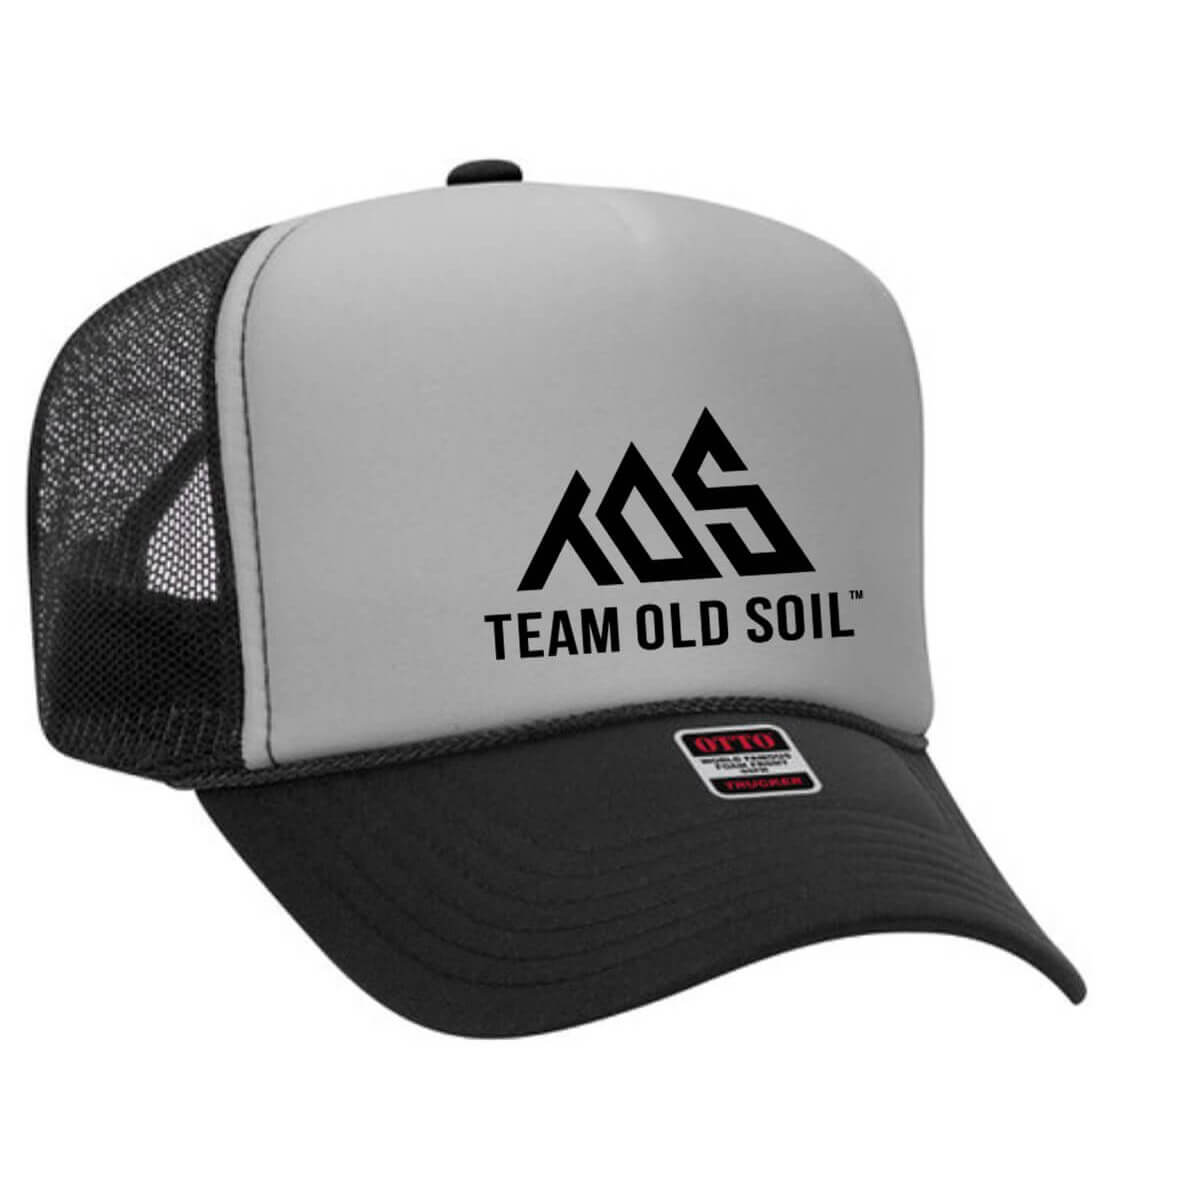 Team Old Soil (TOS) Foam MTB Trucker Hat, unisex Foam Trucker Hat Green and White / Front: 100% Polyester Back: 100% Nylon Mesh / One Size Fits Most 